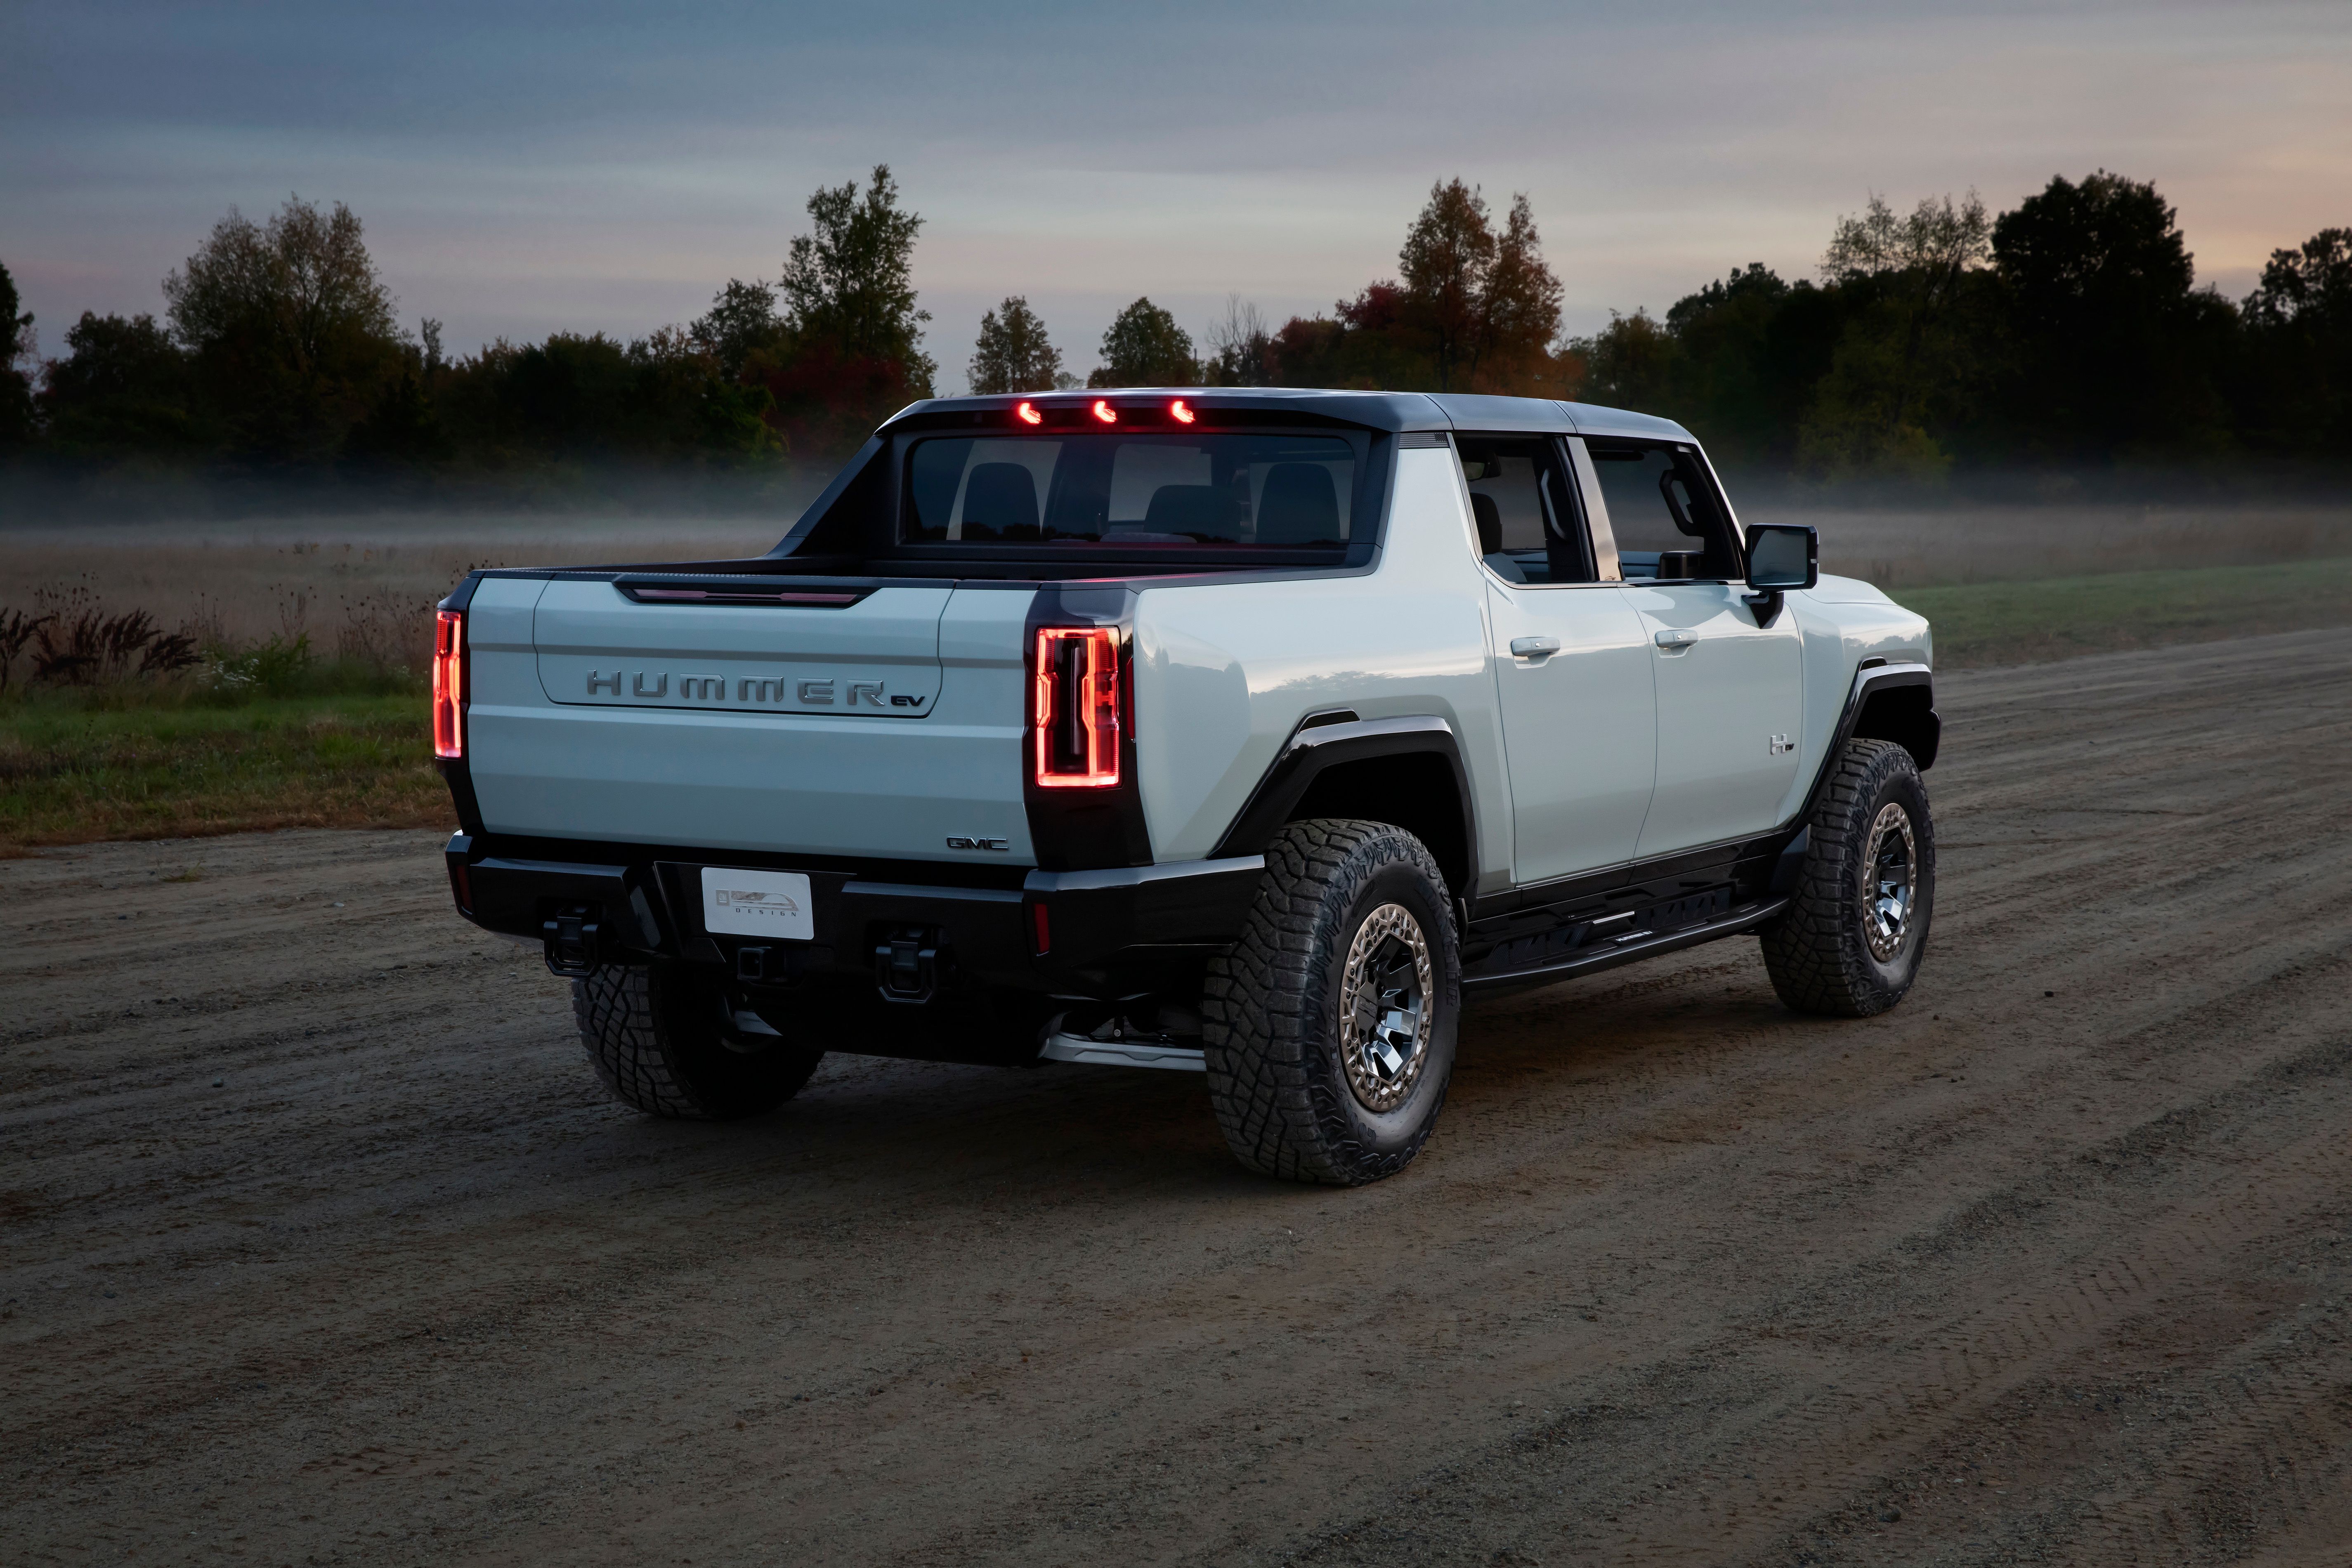 2022 GMC Hummer EV - Highlights and Photo Gallery